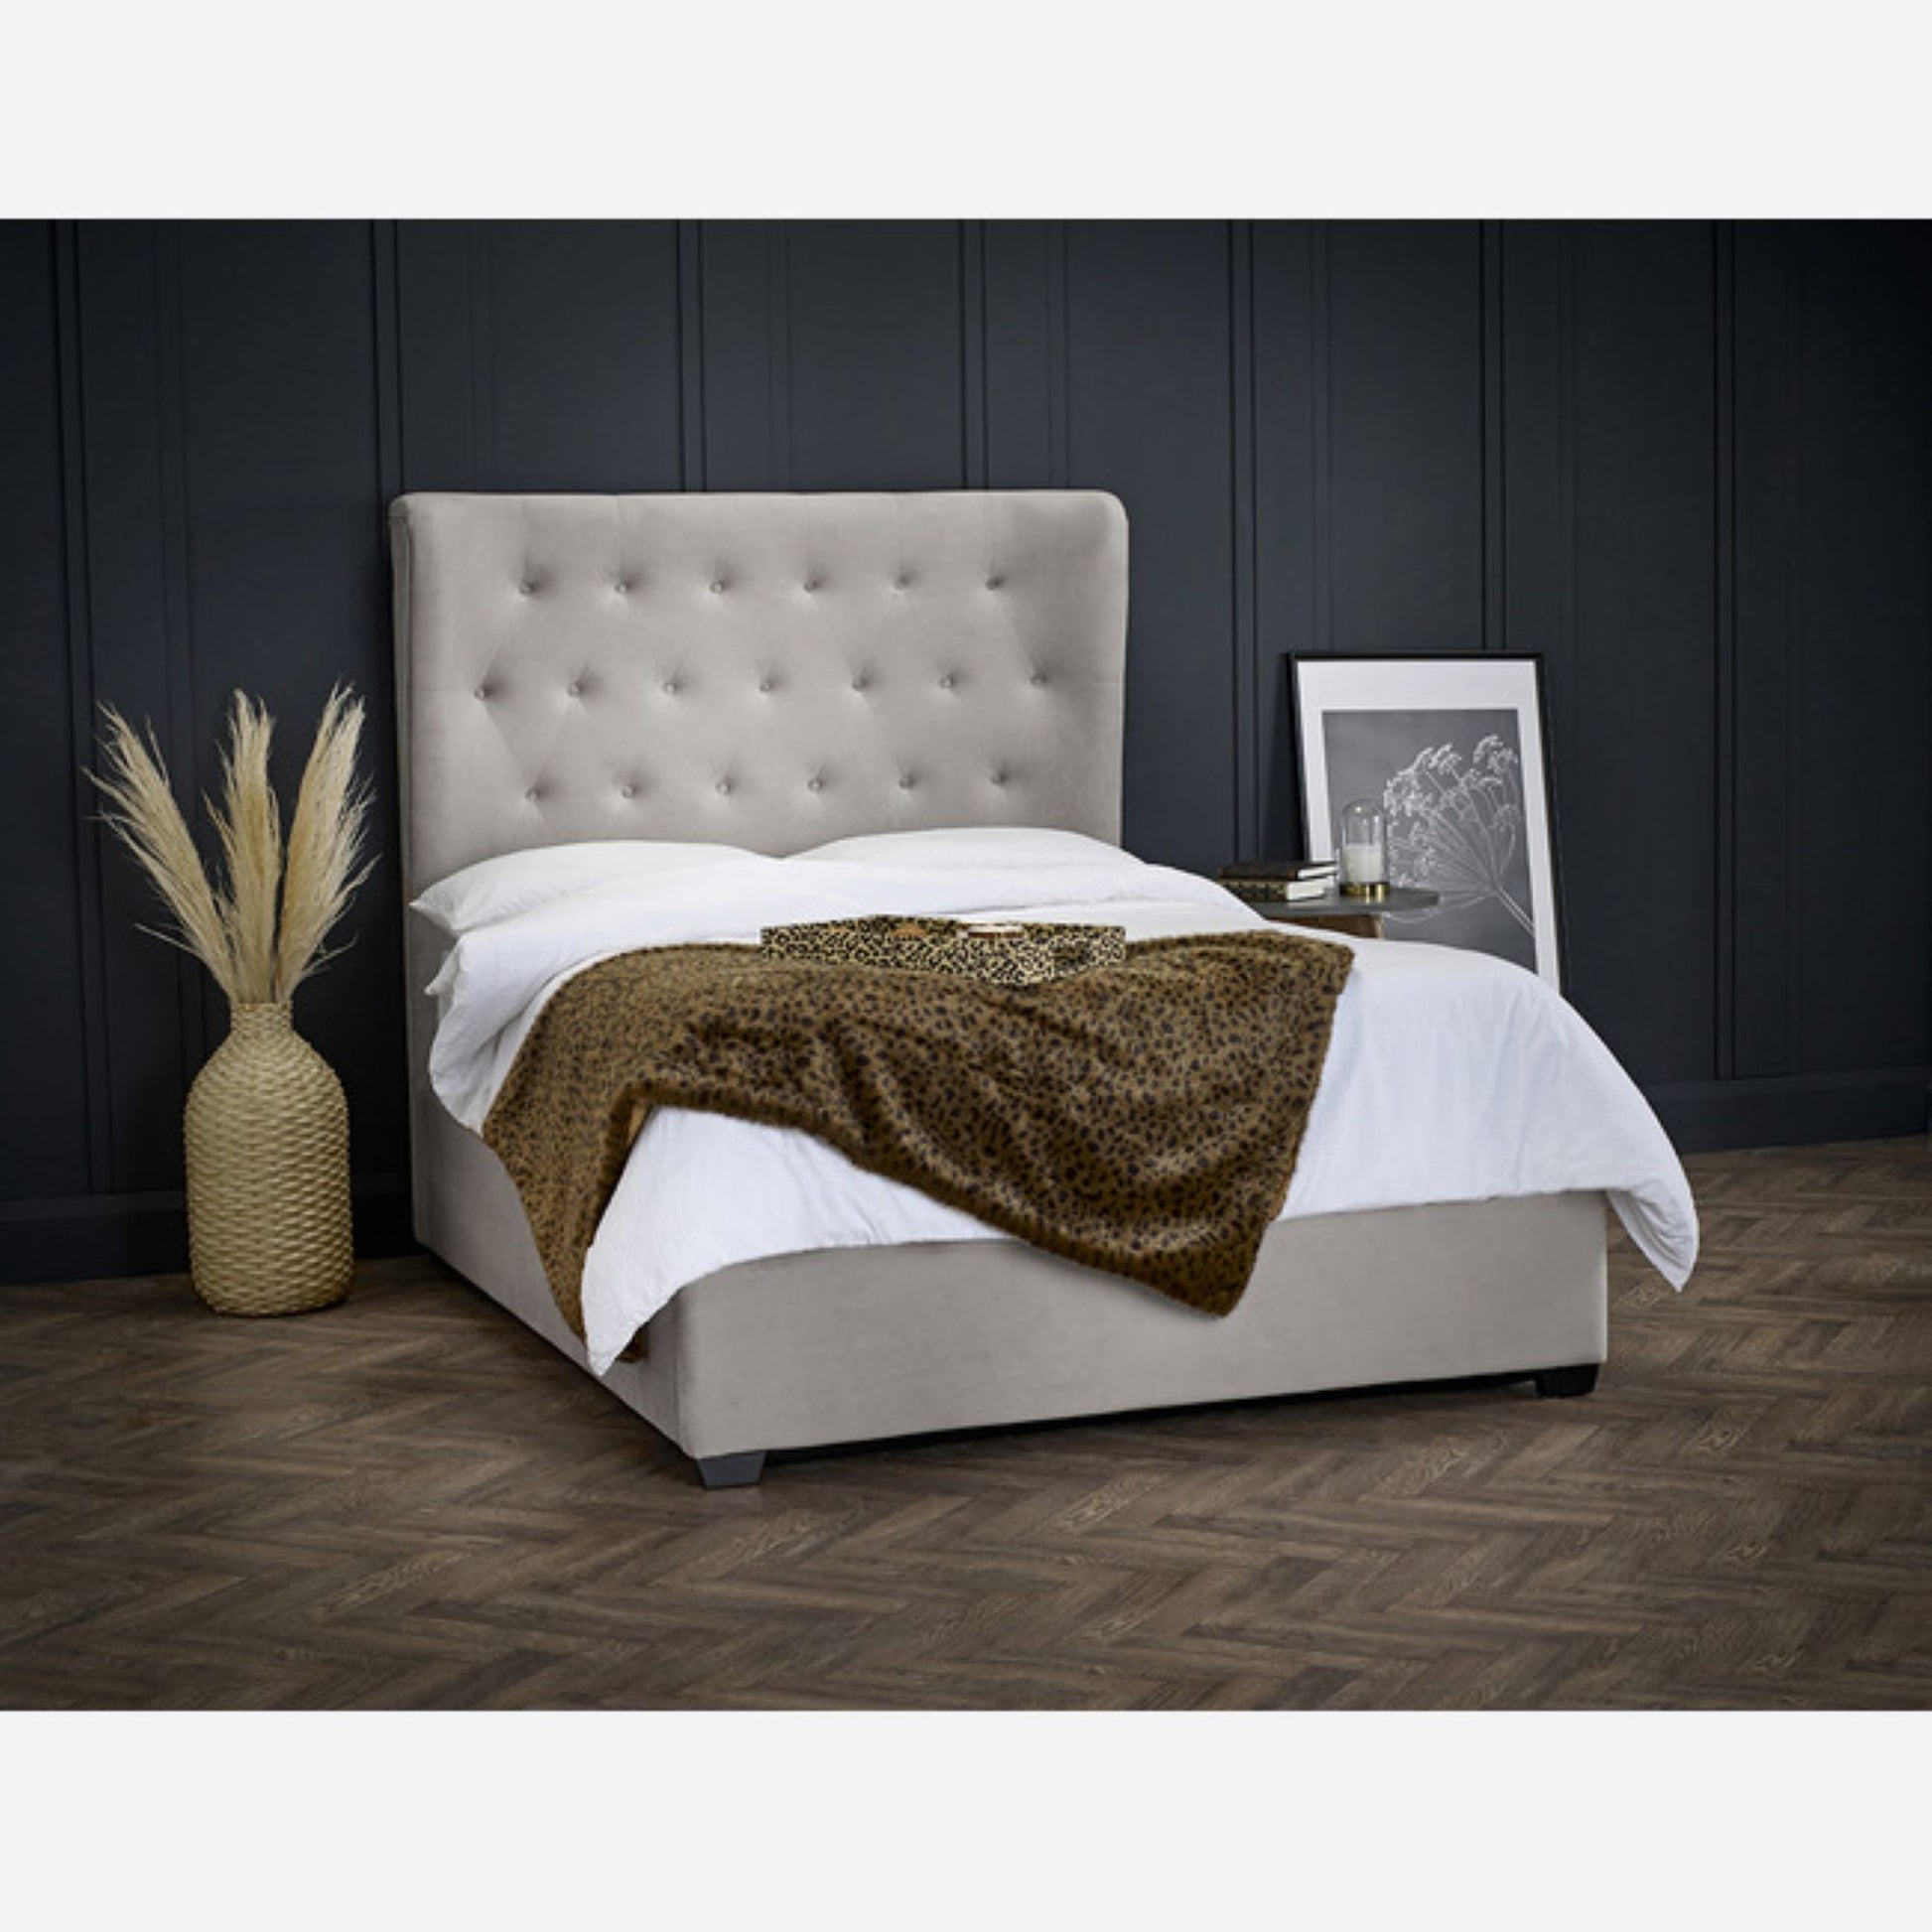 Kingsize Ottoman Bed with Buttoned Headboard - Cappuccino